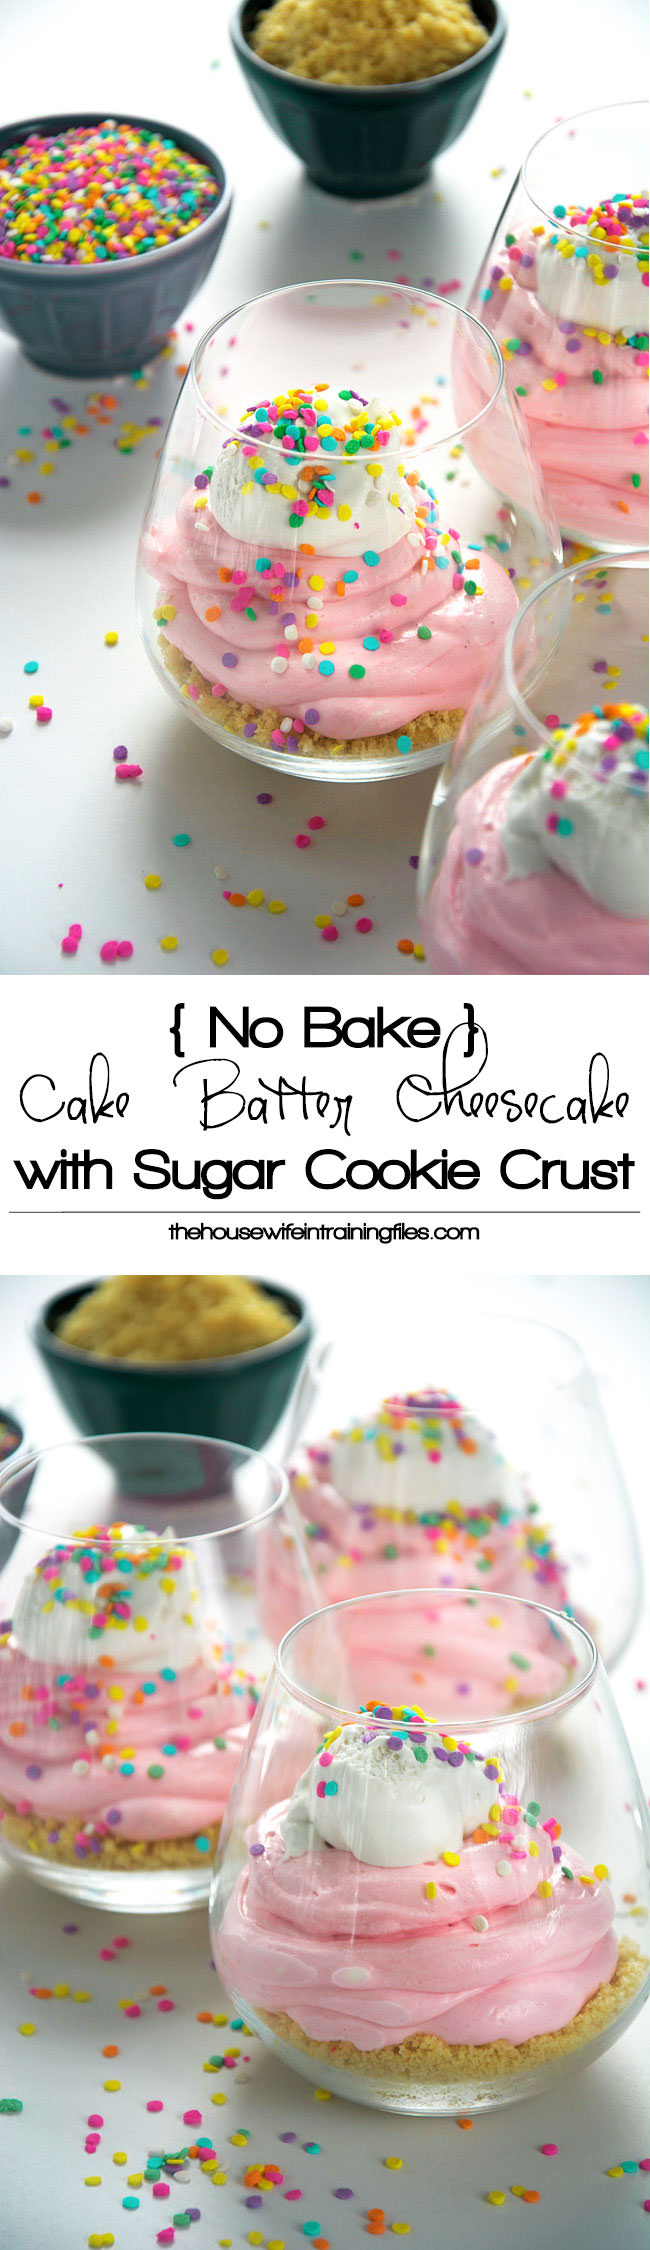 An easy, no bake cake batter cheesecake is healthy and simple to make with greek yogurt, low fat cream cheese, sprinkles and a buttery sugar cookie crust! #cheesecake #nobake #cakebatter #funfetti